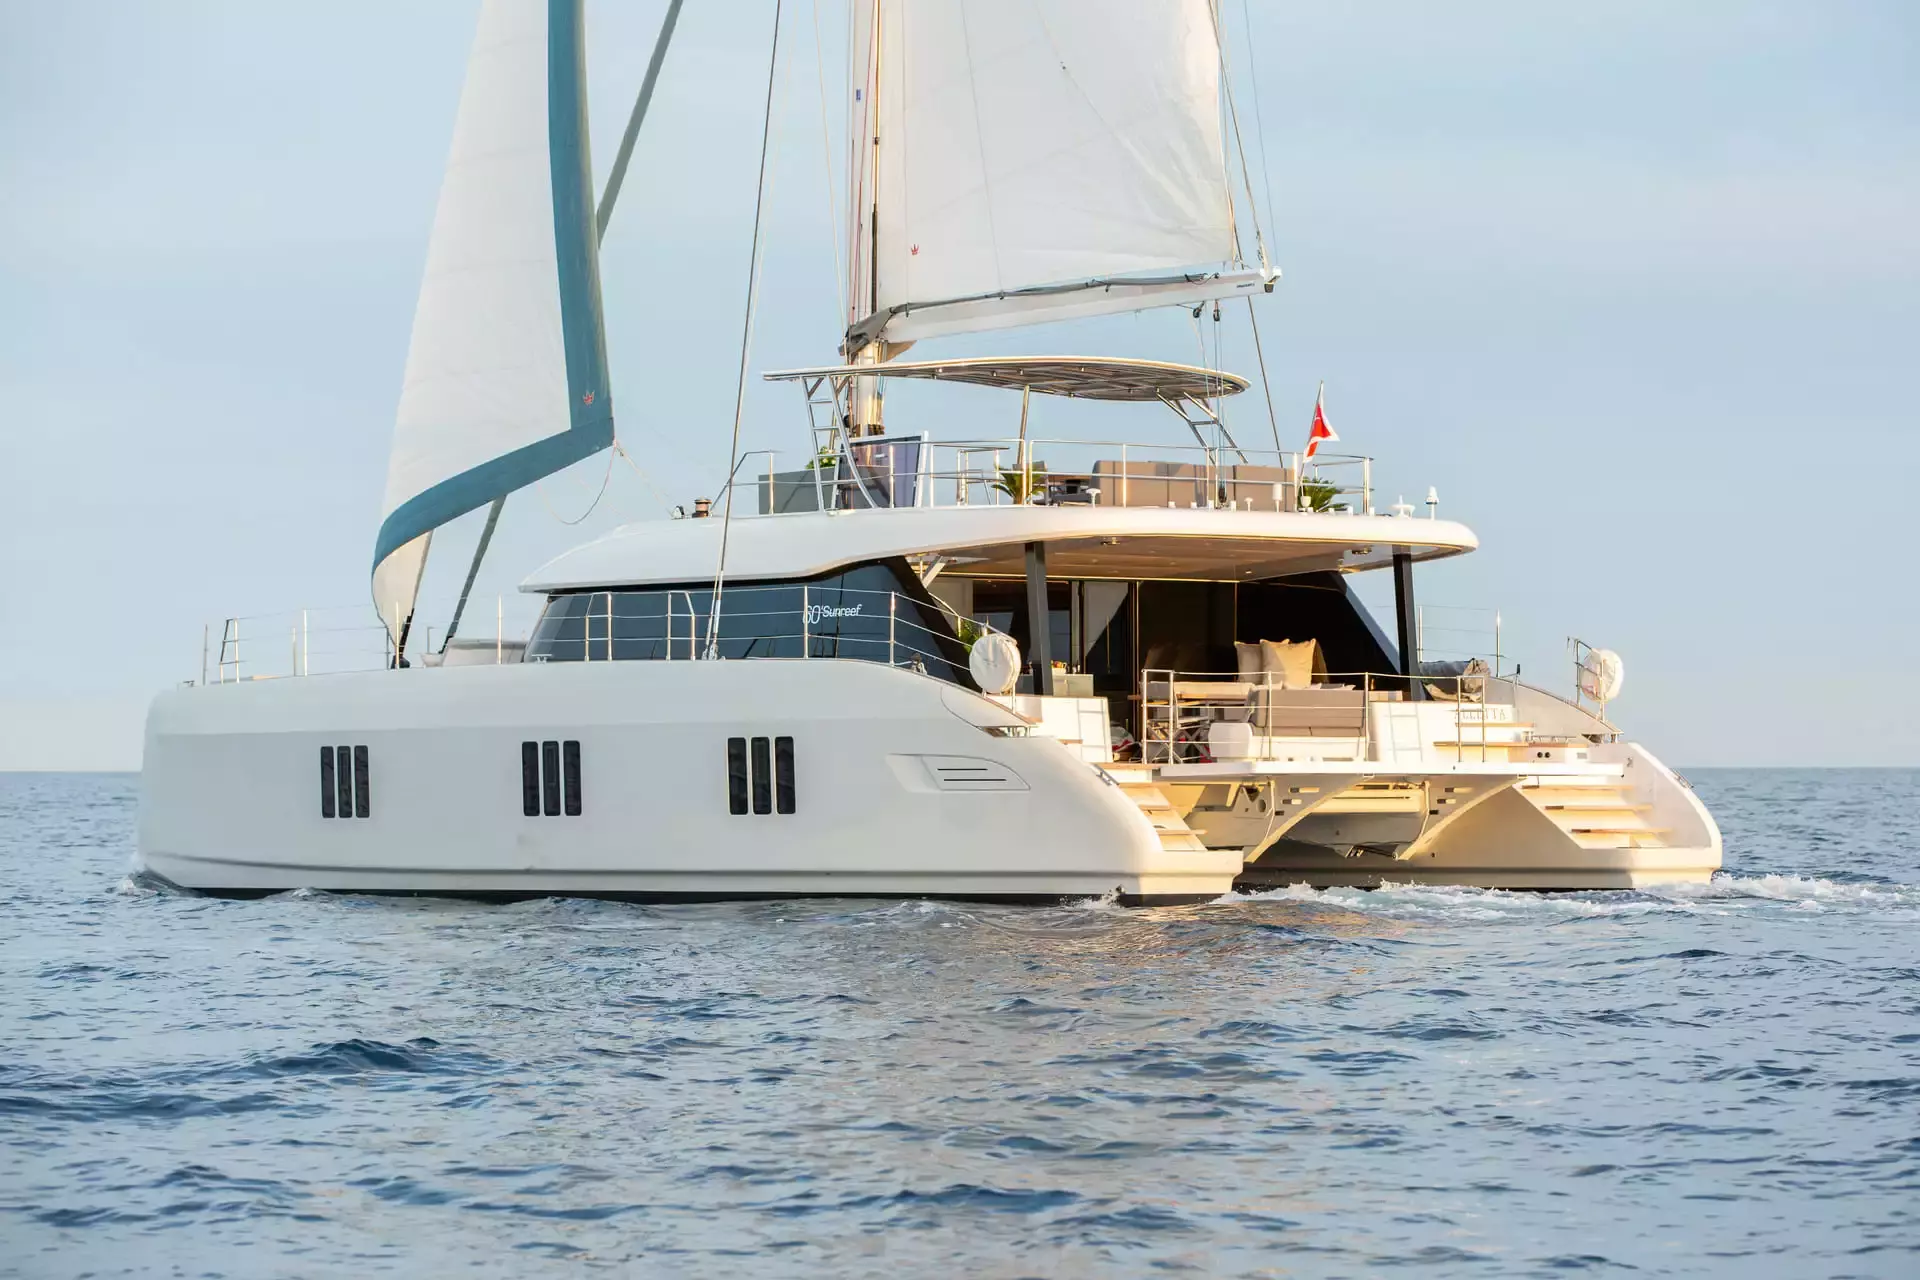 Sunbreeze by Sunreef Yachts - Special Offer for a private Luxury Catamaran Charter in Mallorca with a crew